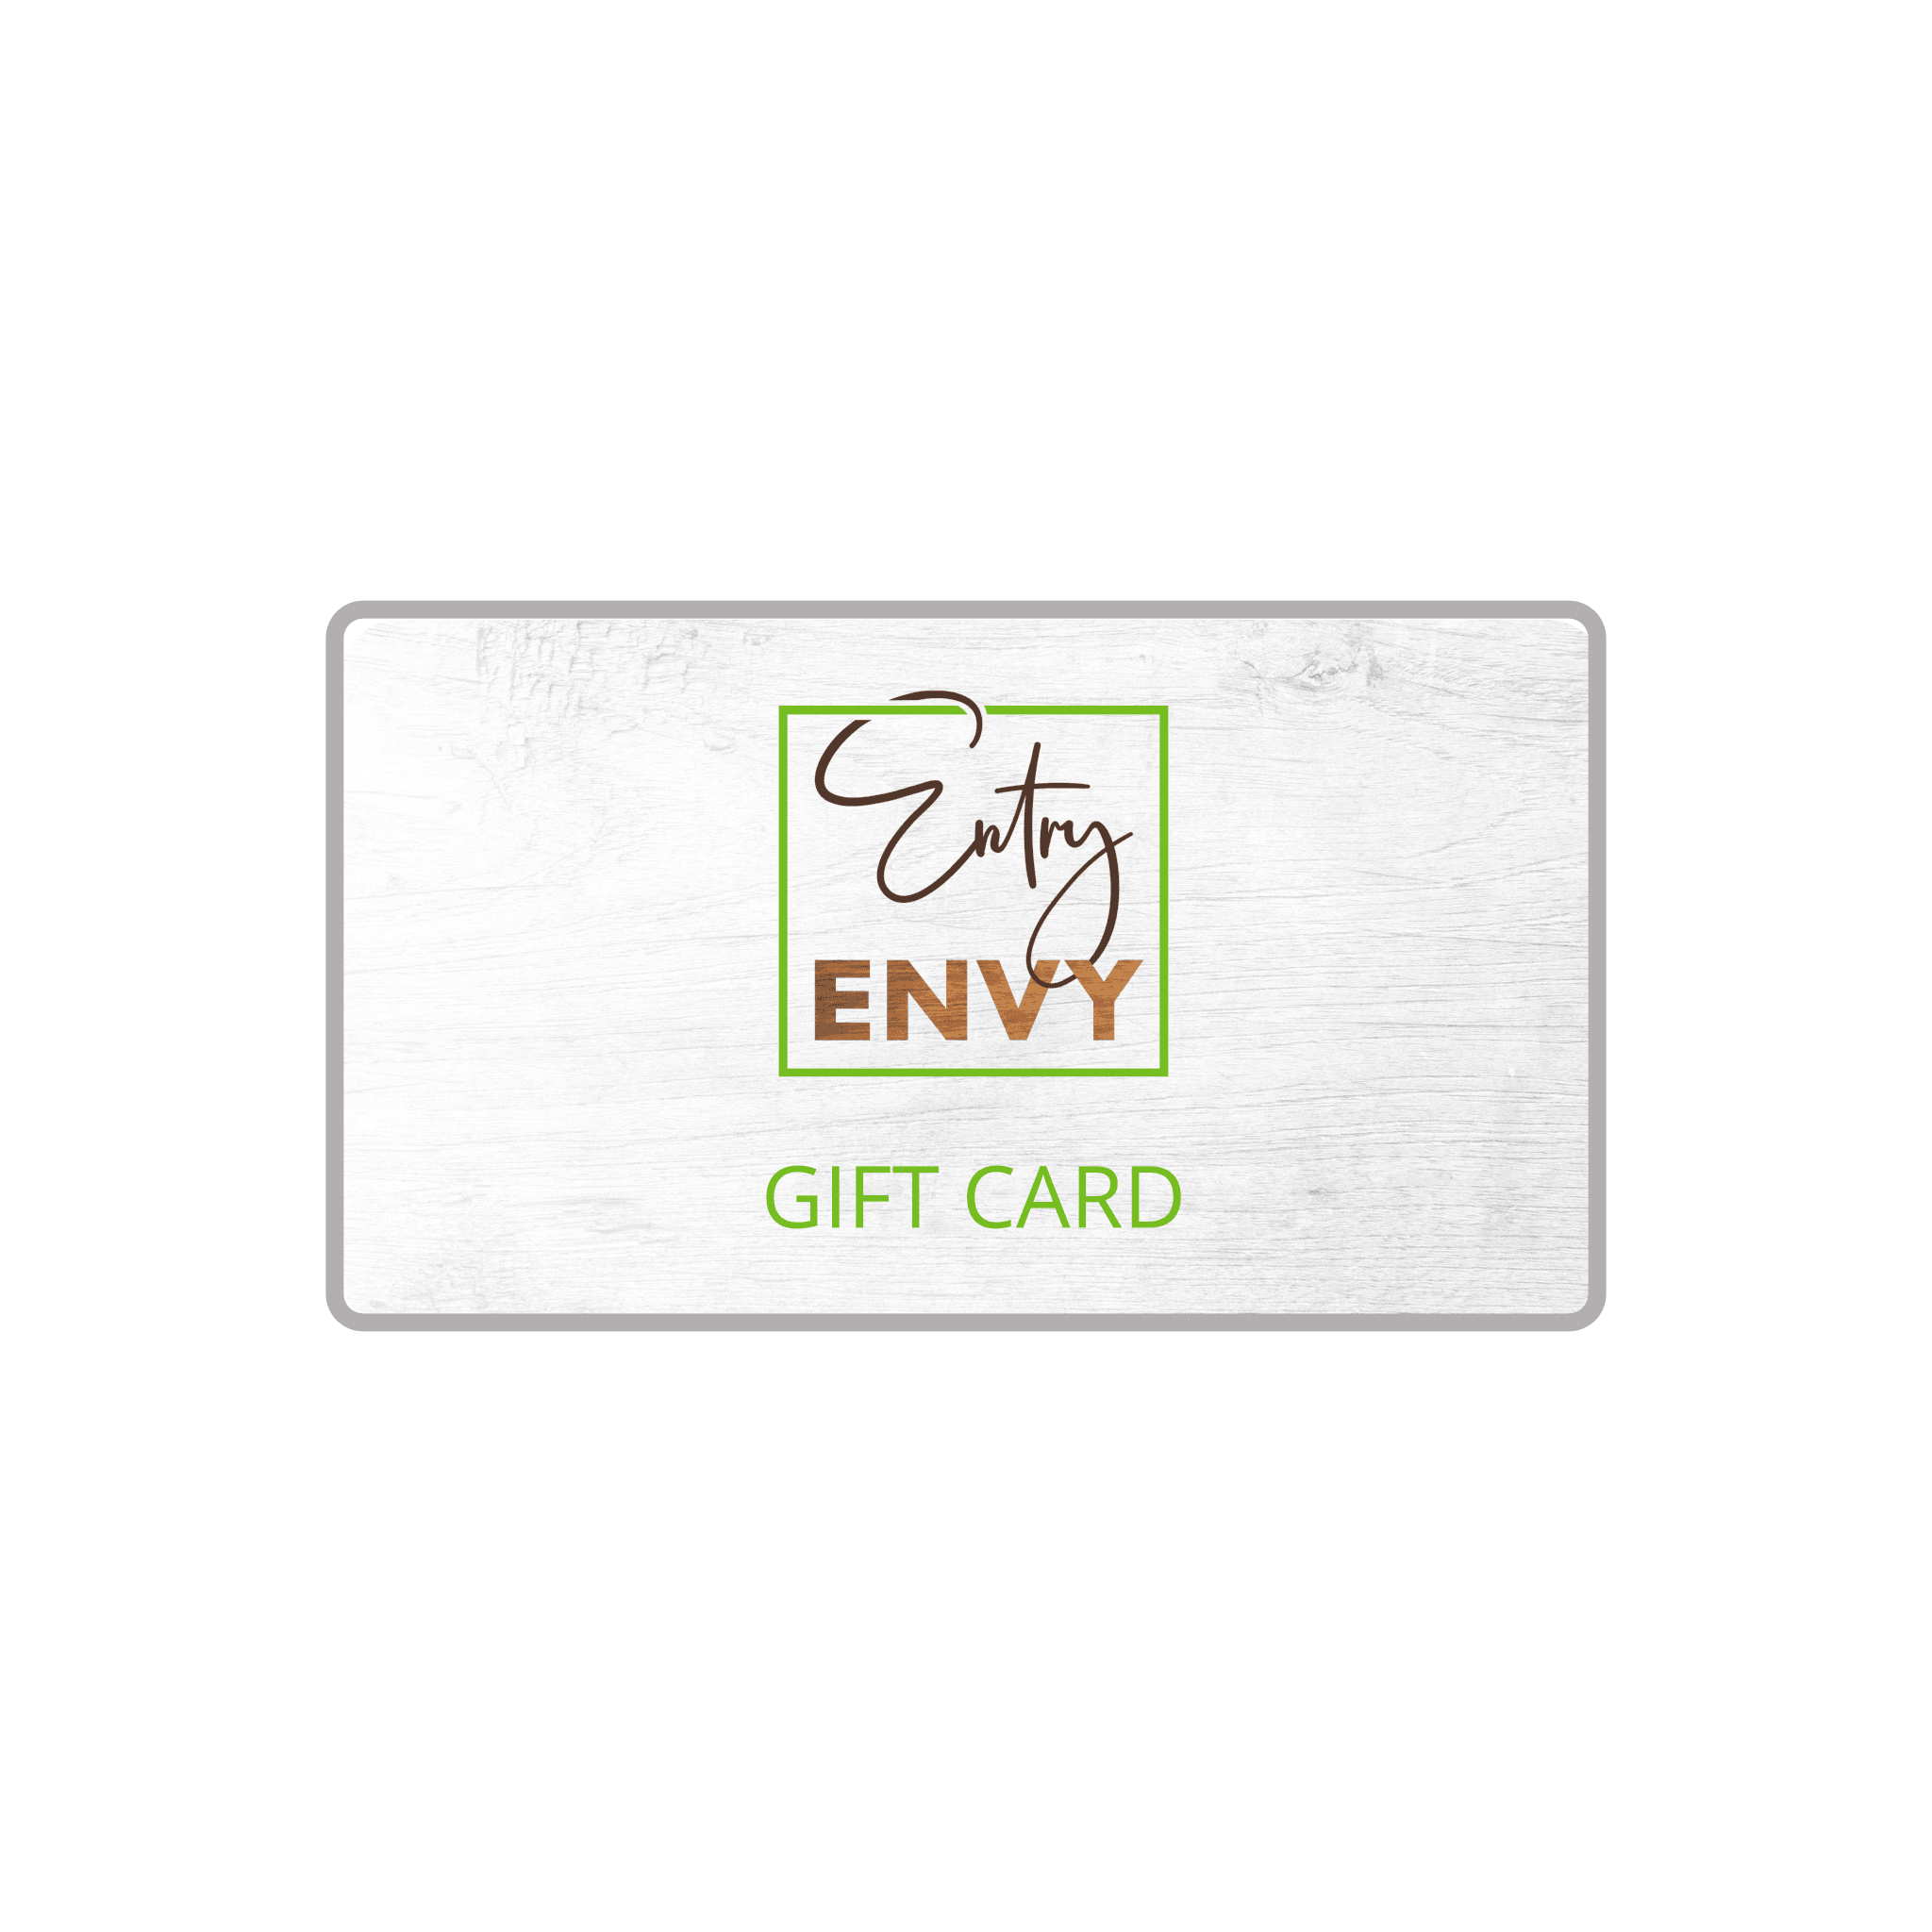 Copy of Gift Cards